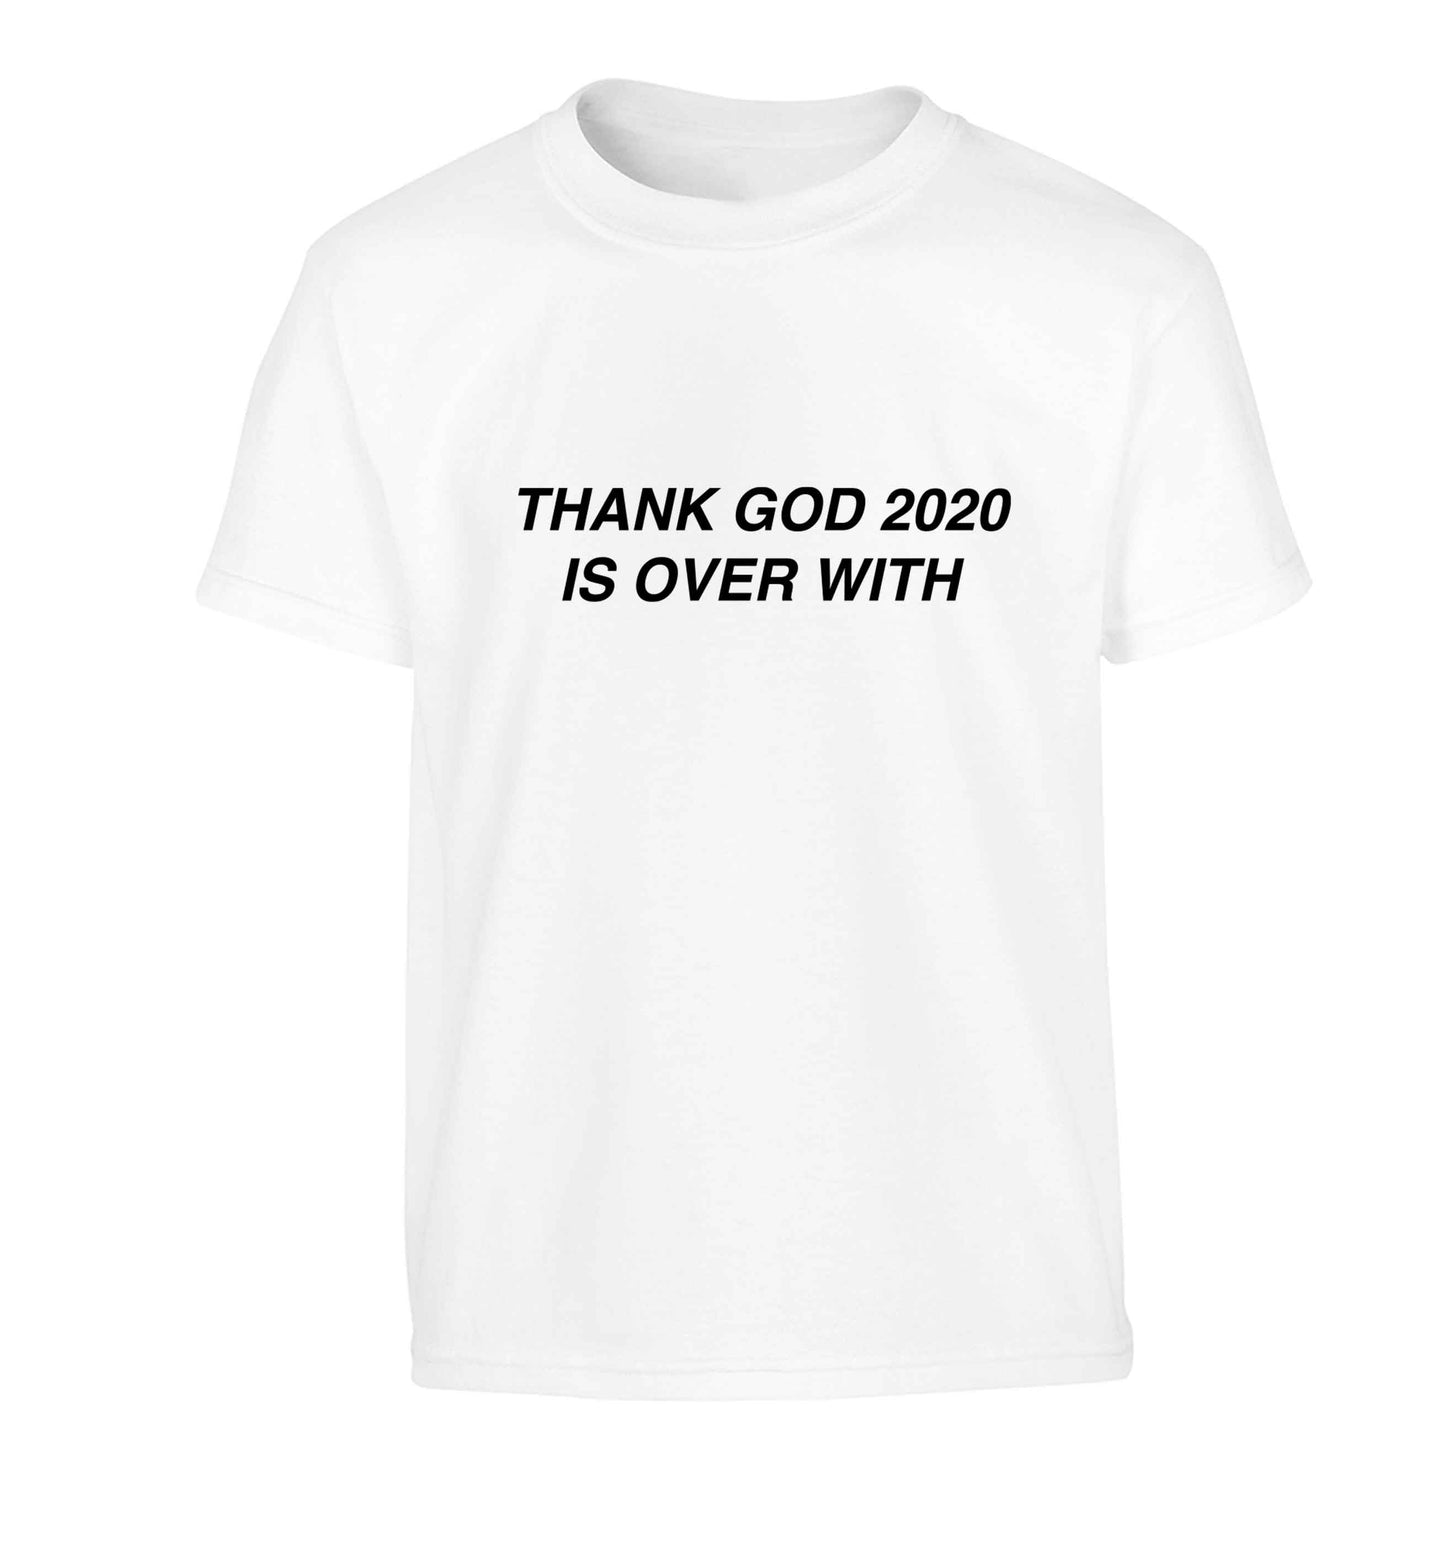 Thank god 2020 is over with Children's white Tshirt 12-13 Years